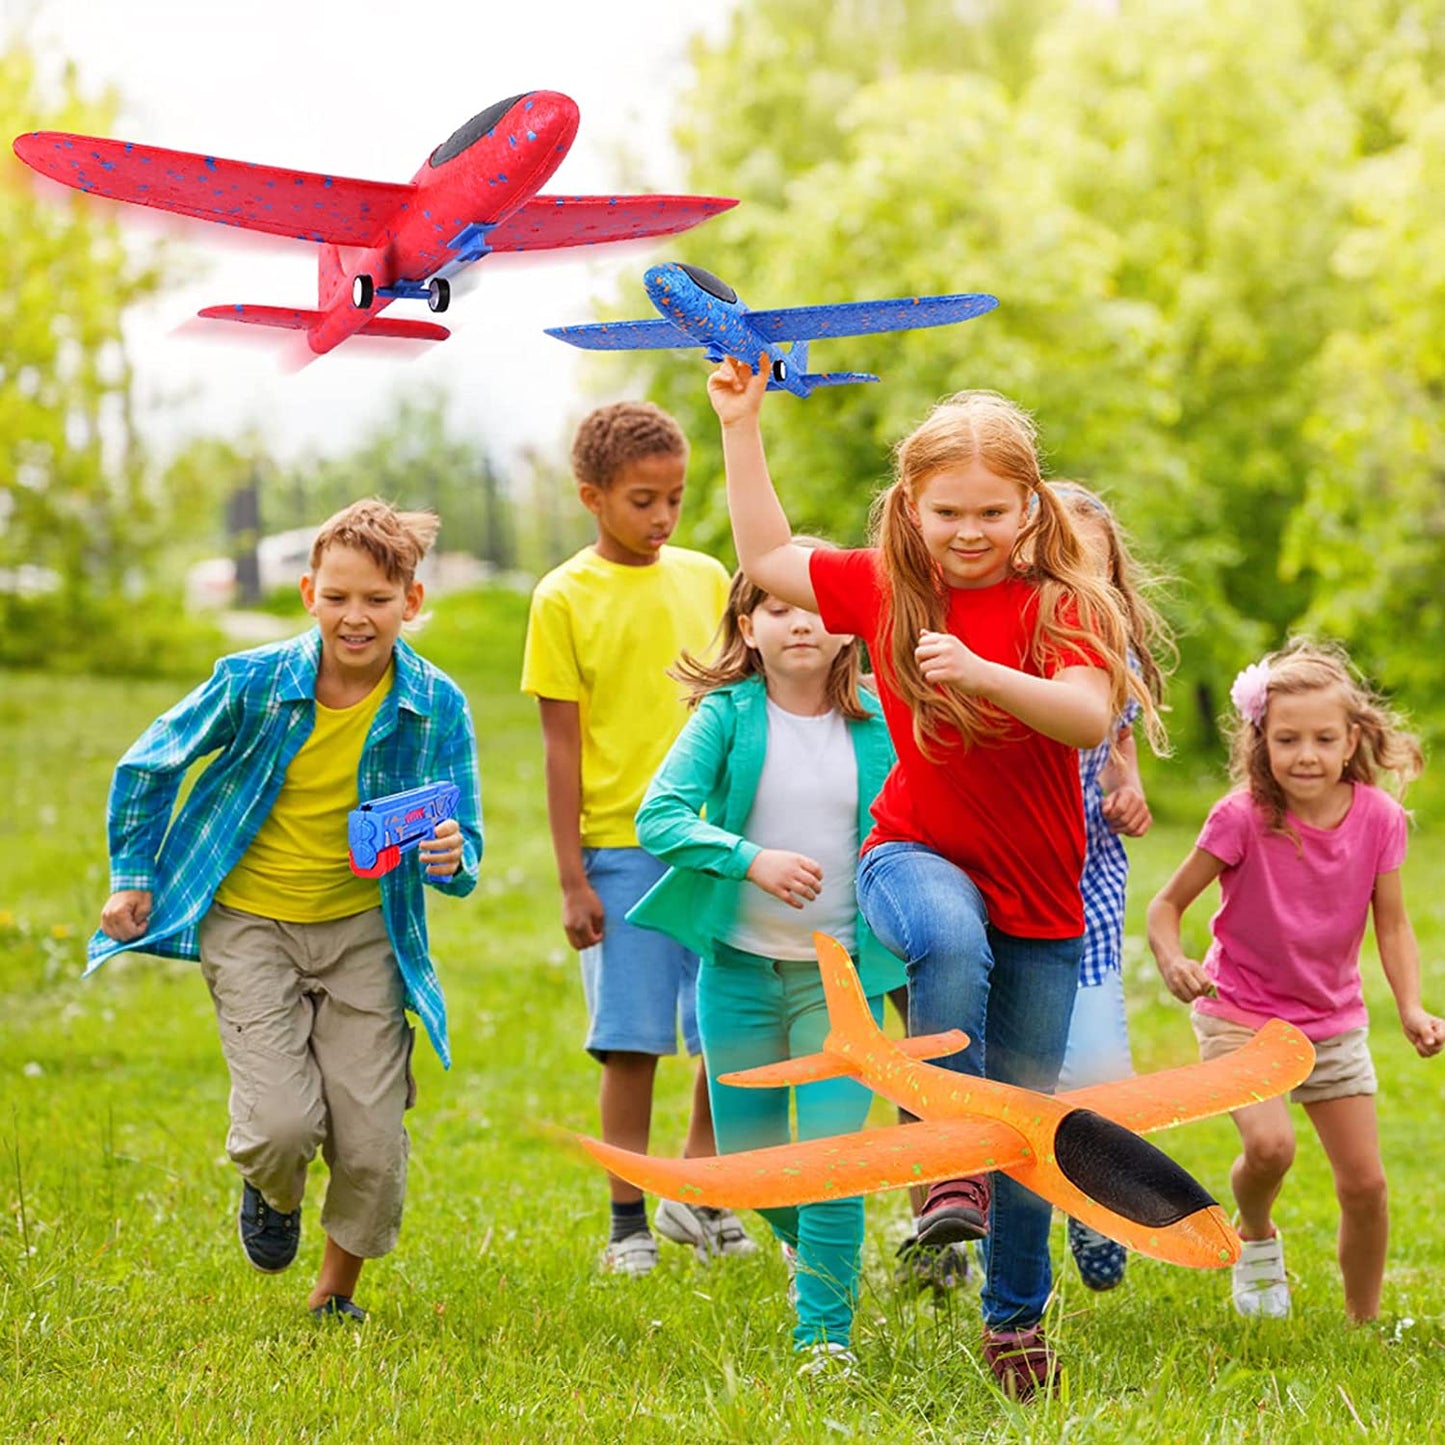 Airplane Launcher Toy, Foam Throwing Glider Plane with Catapult Gun, Indoor Outdoor Shooting Game for Kids Boys Girls Age 3-12,Flying Gadget Children Xmas Birthday Gift & Present Stocking Filler - FoxMart™️ - 36 months - 10 years